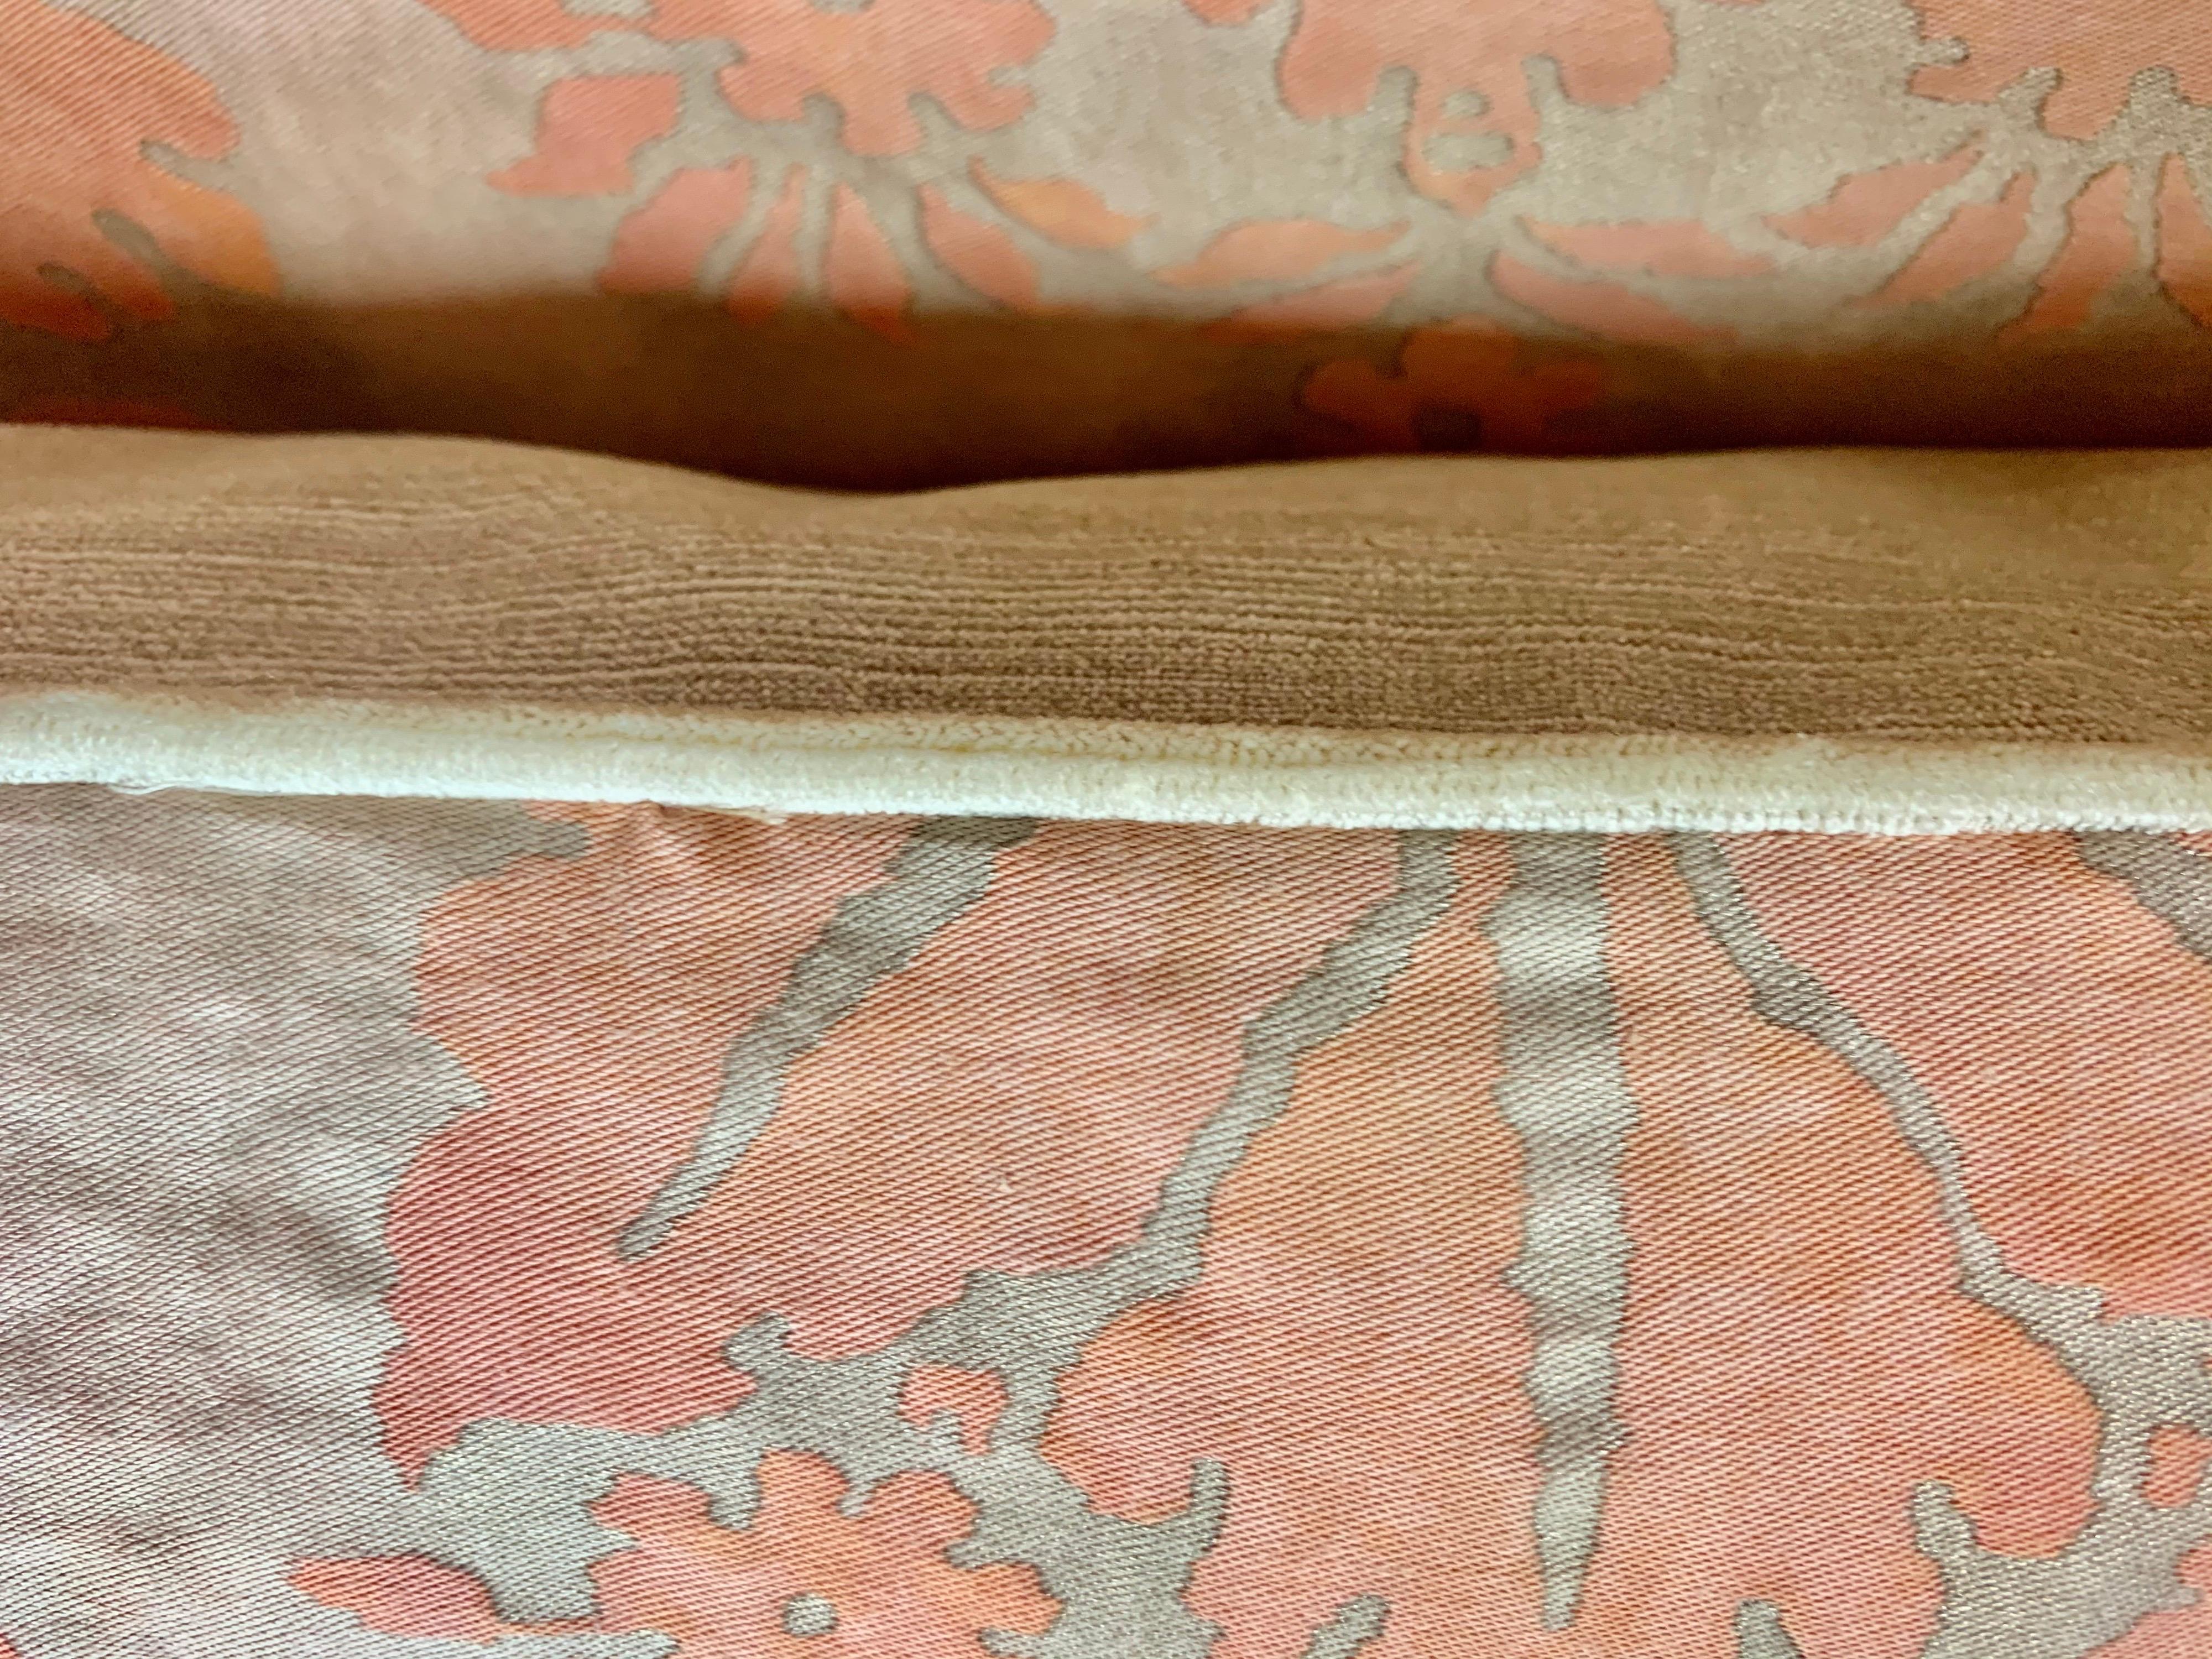 Pair of Vintage Glicine Patterned Fortuny Textile Pillows 1